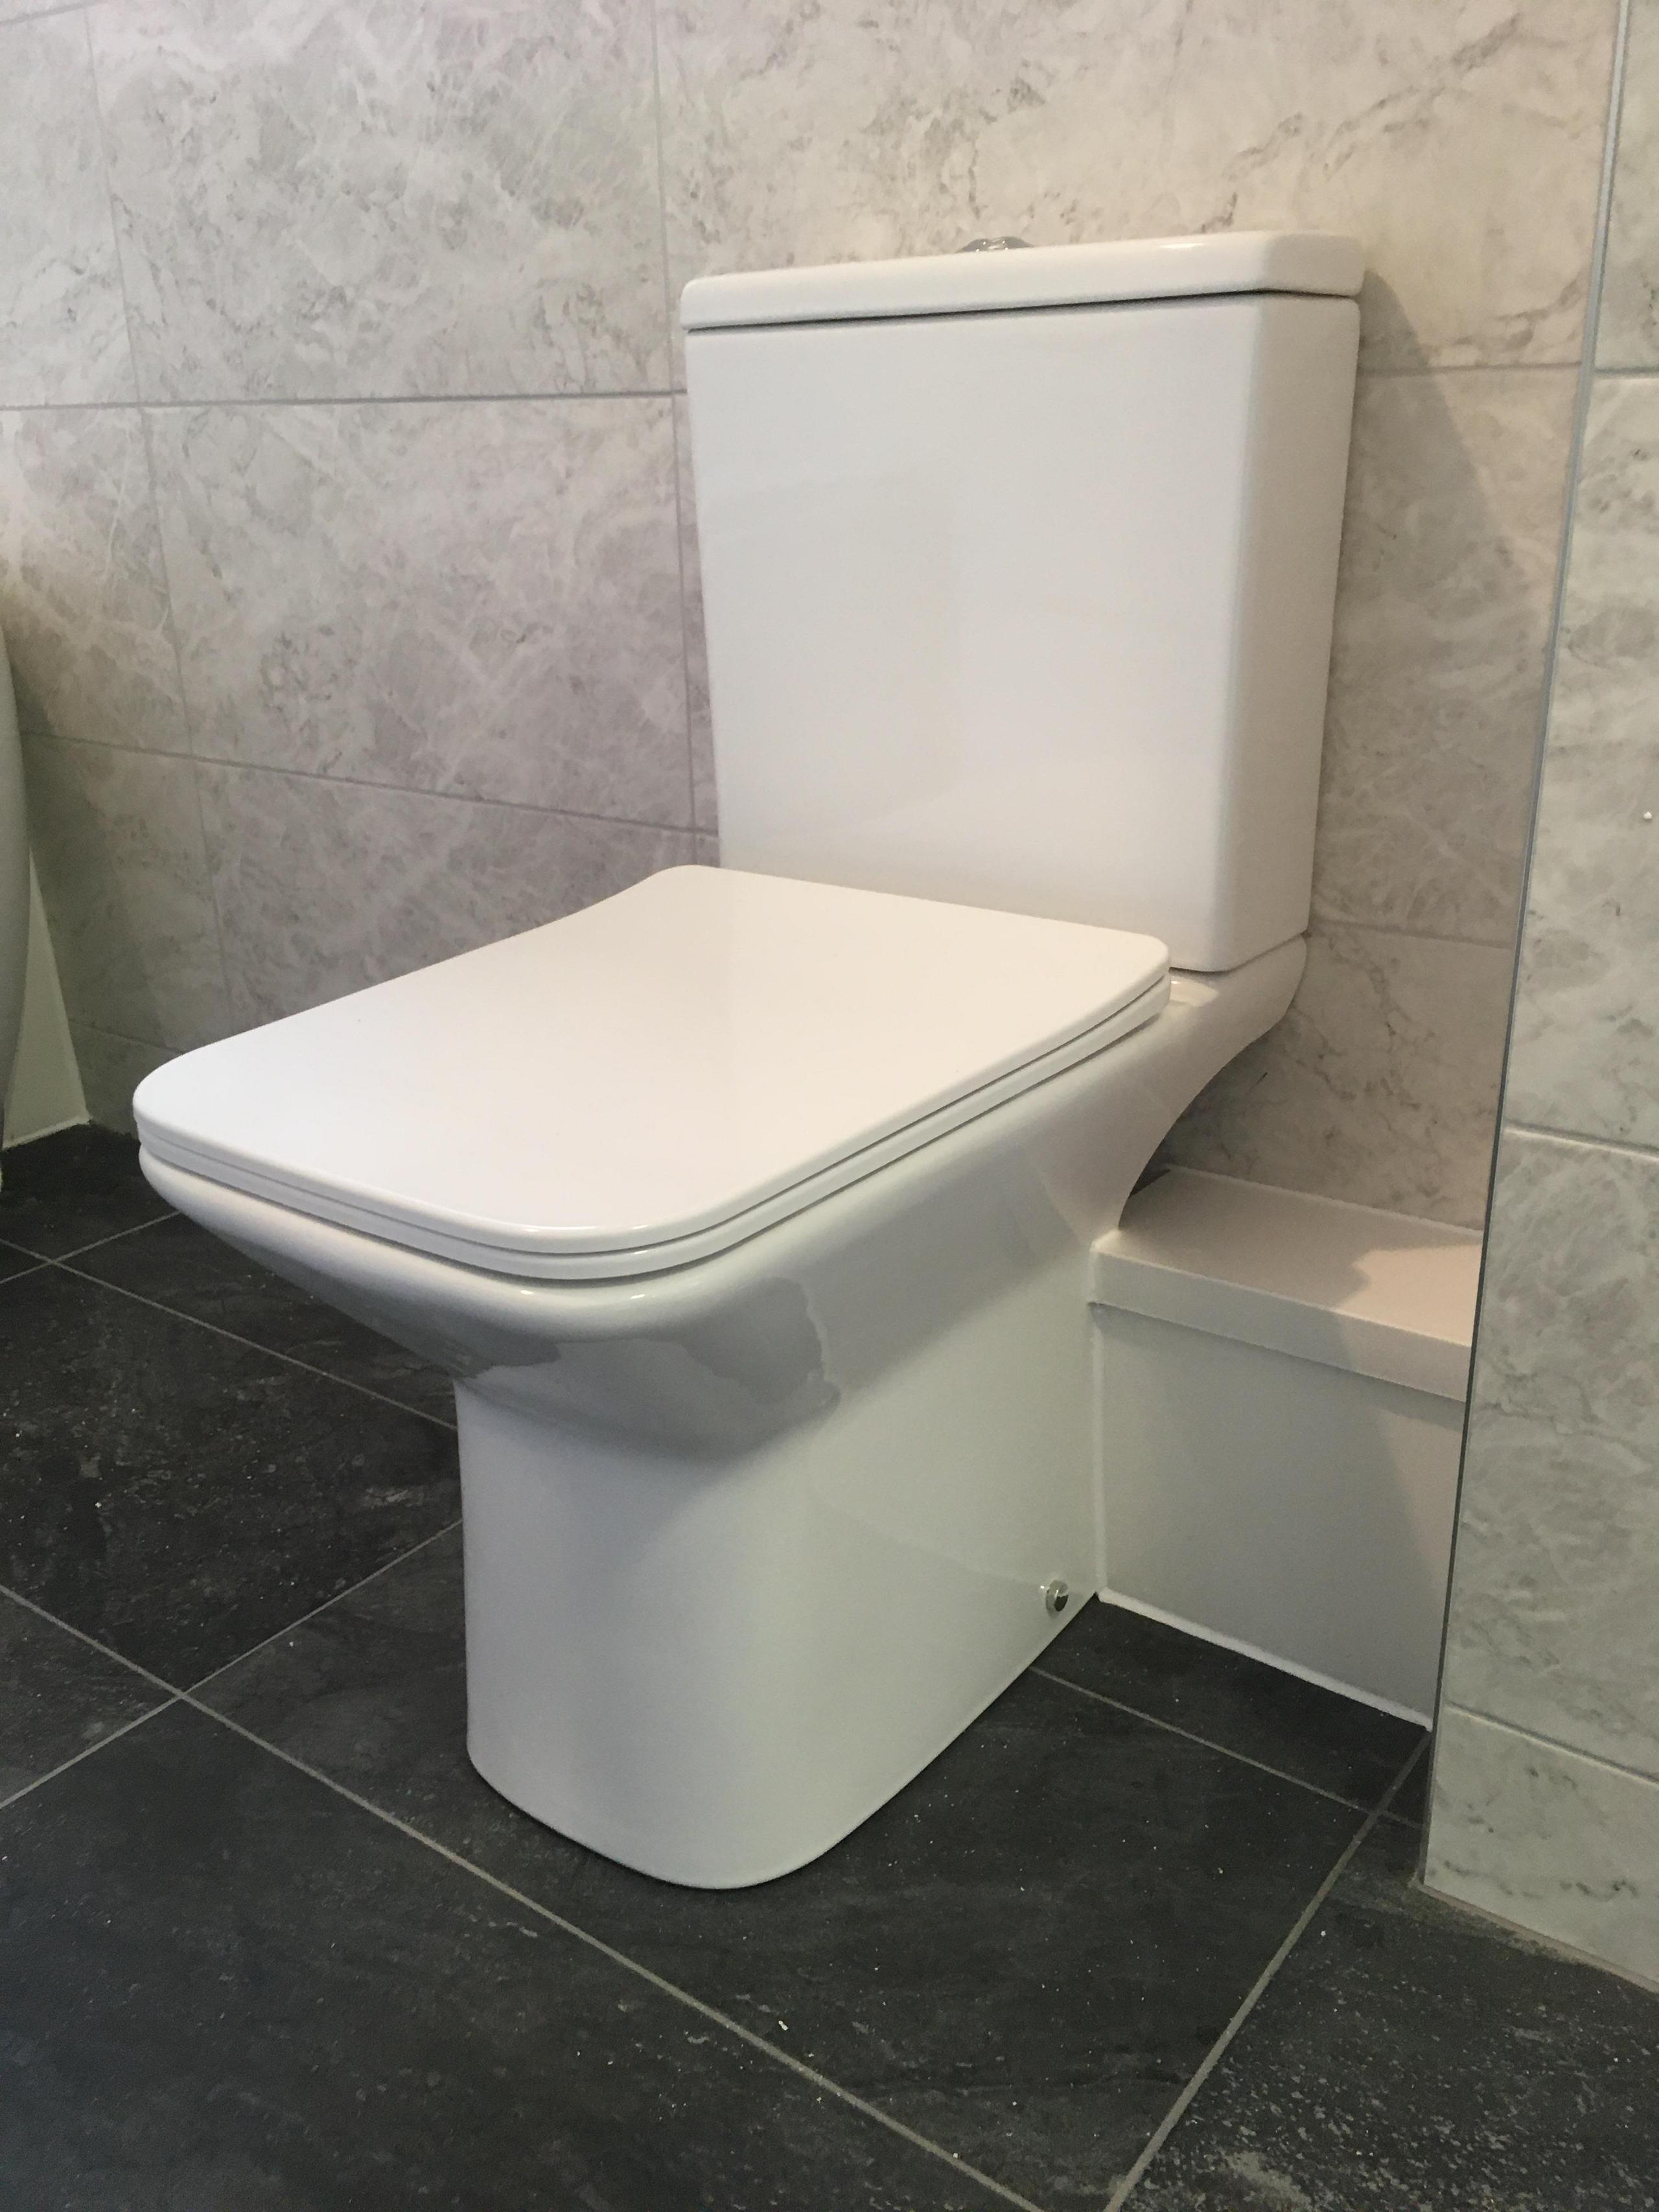 slim line close coupled toilet in new bathroom